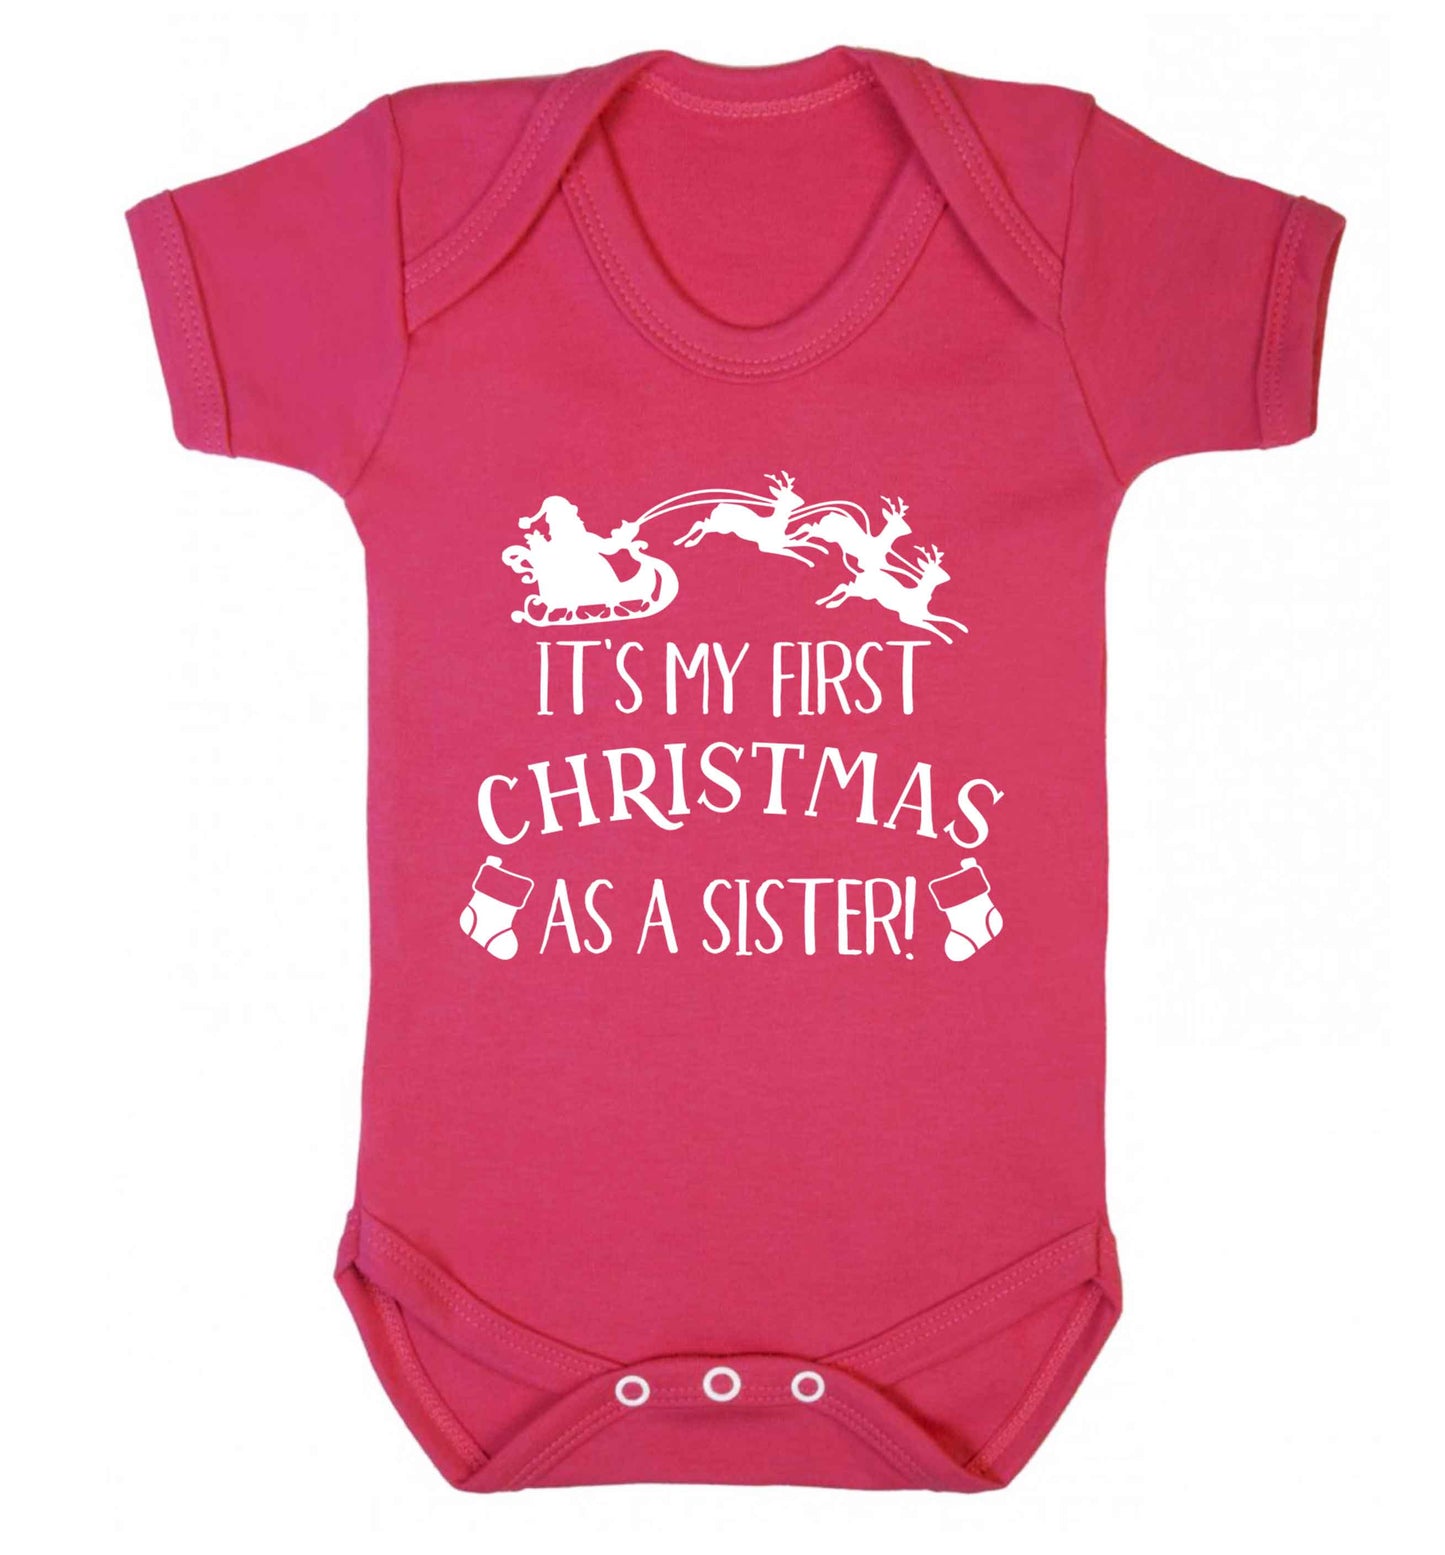 It's my first Christmas as a sister! Baby Vest dark pink 18-24 months